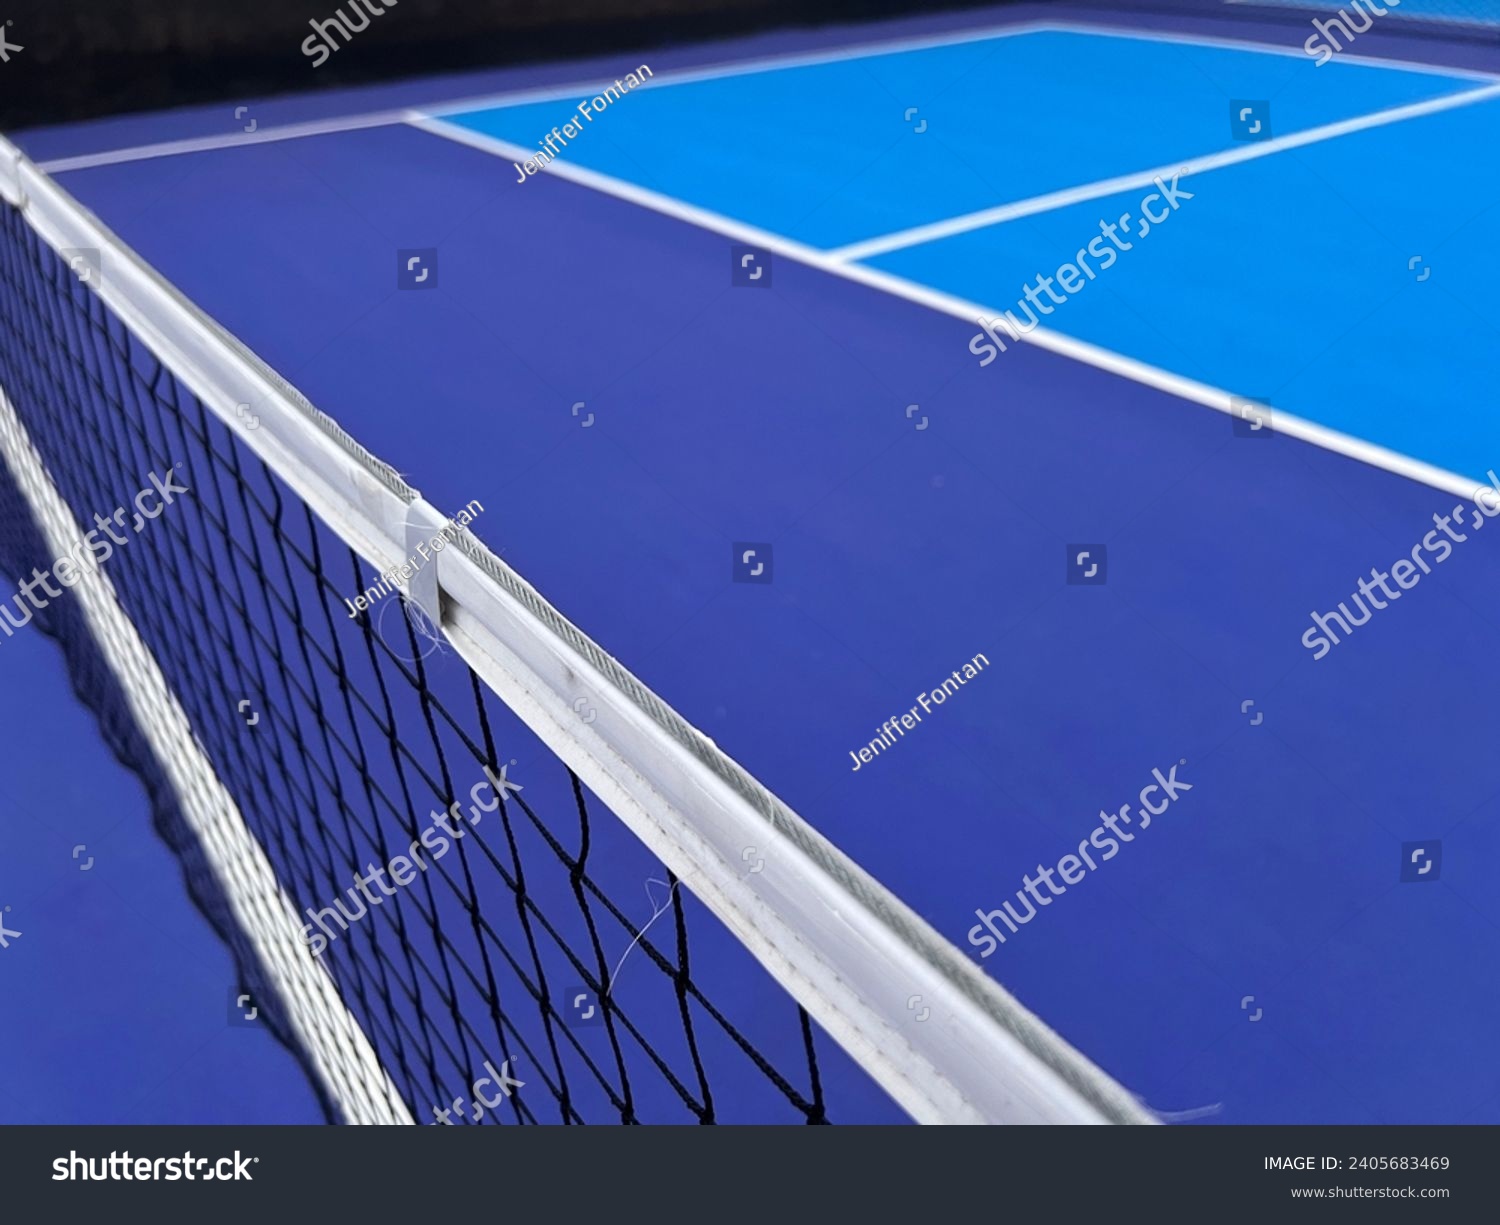 Pickle ball court in blue and white colors with net in black and white. Wide view of a pickleball court #2405683469